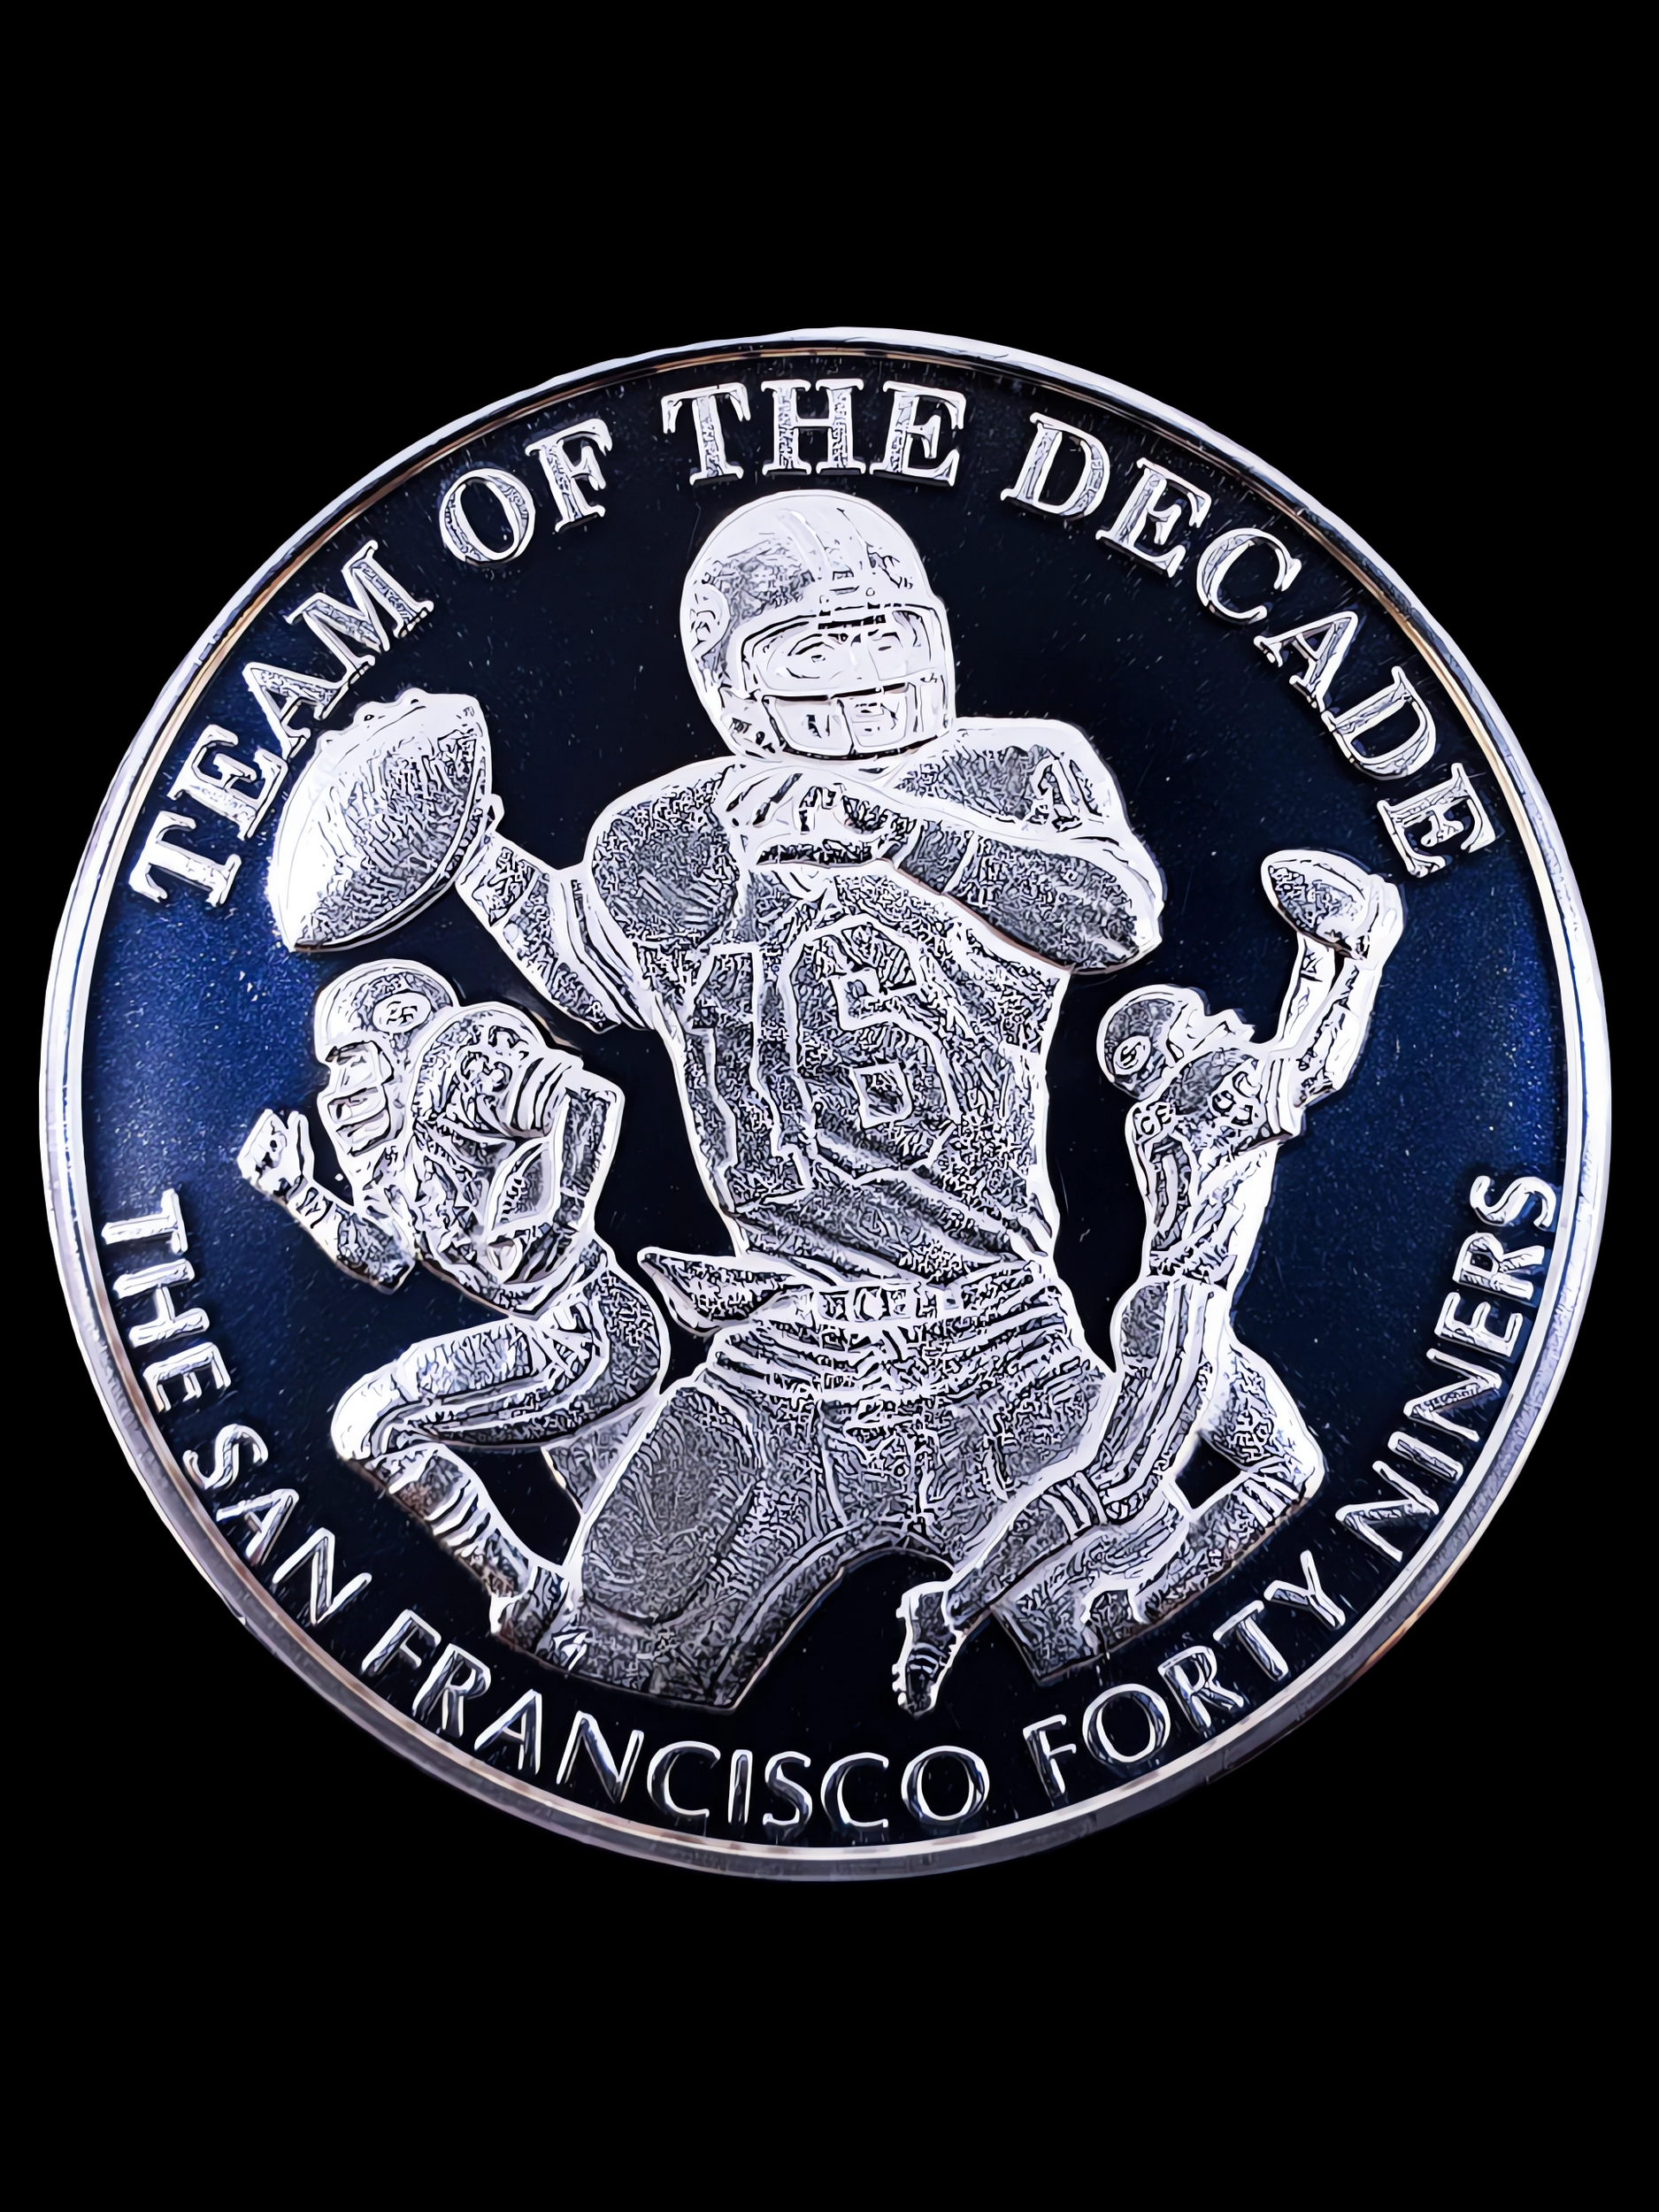 San Francisco Forty Niners Super Bowls World Champions 2oz Silver Coin